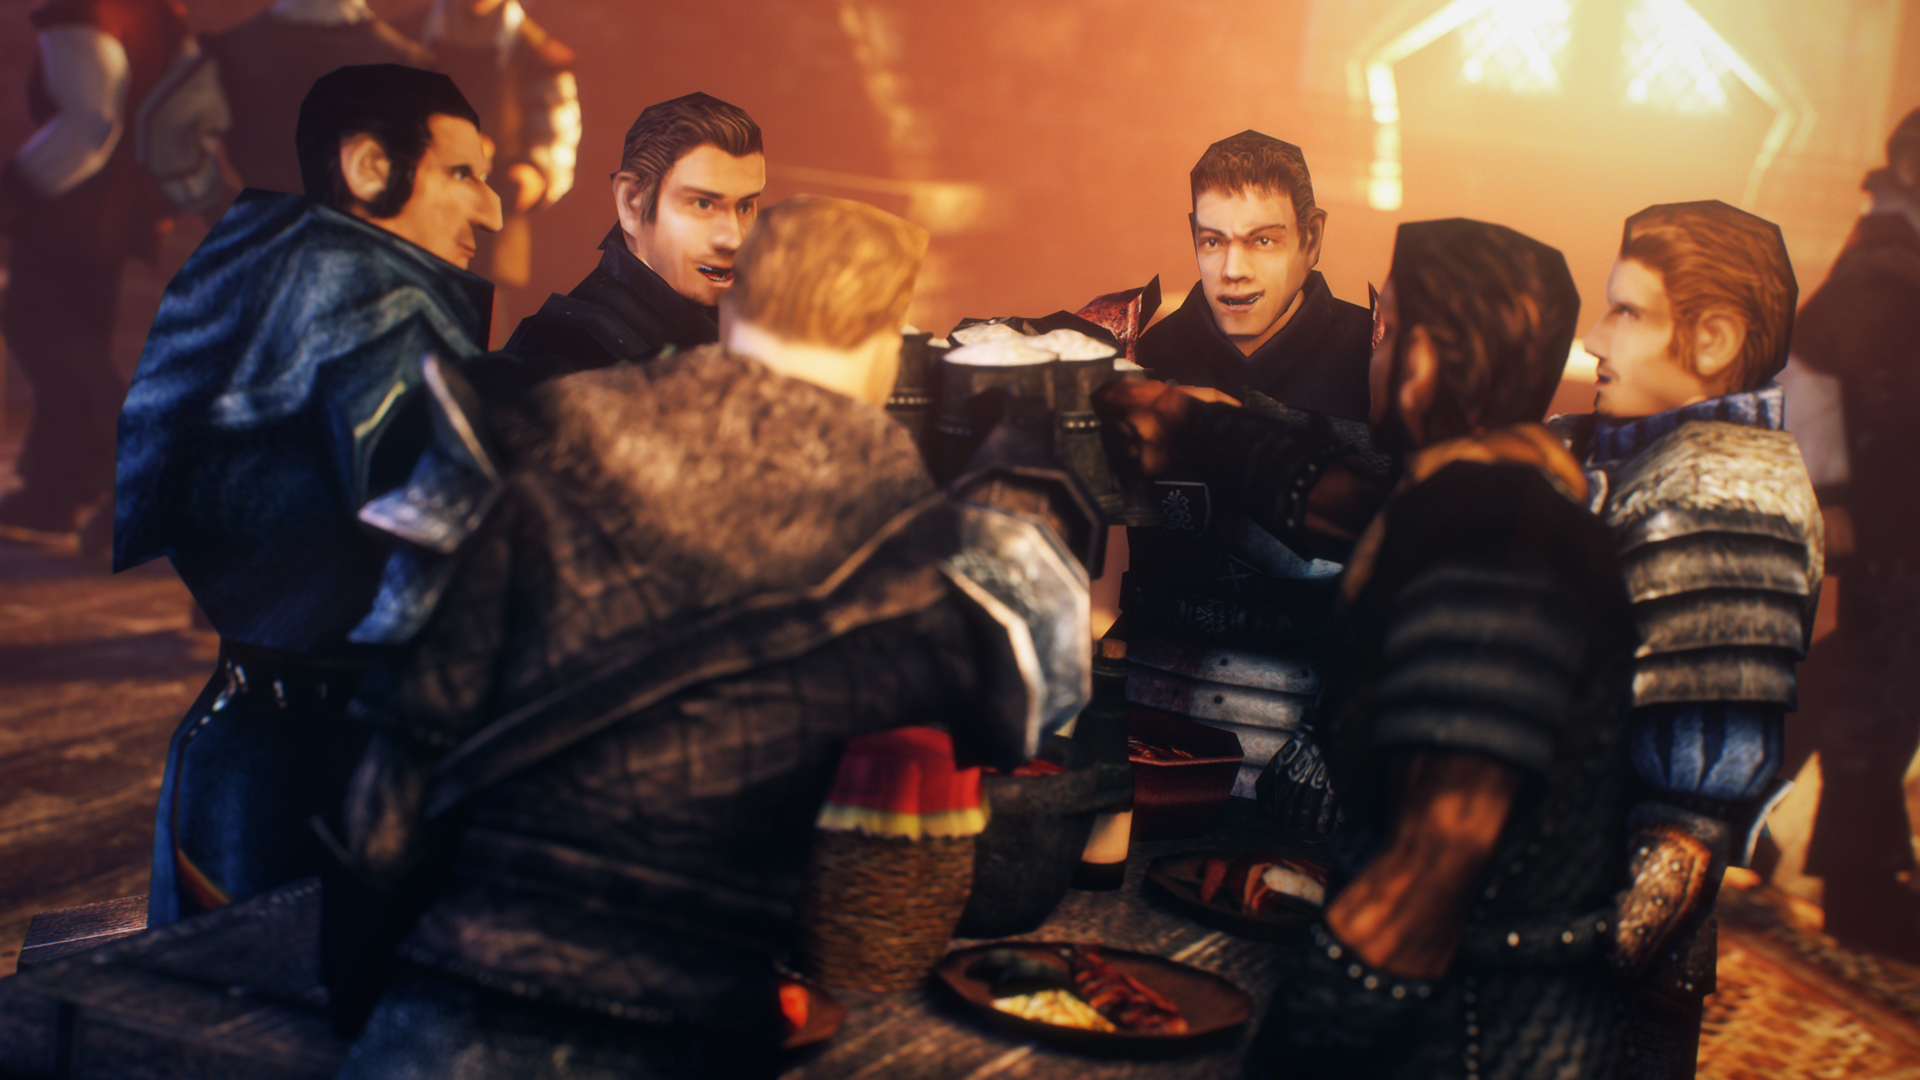 Mods of the month at Dragon Age: Origins - mods and community